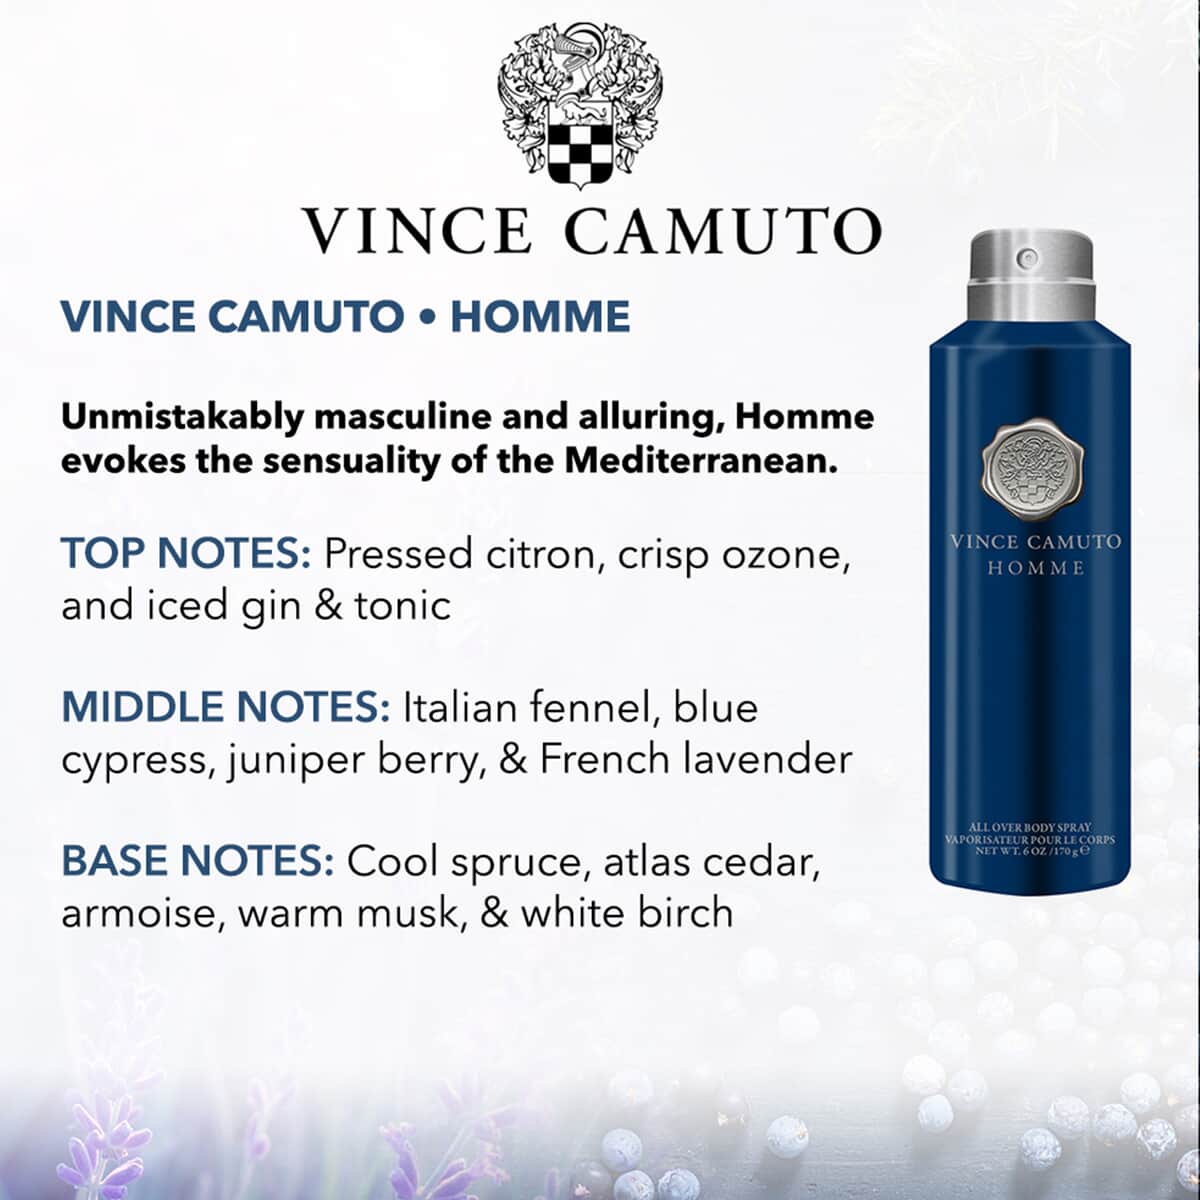 Buy Vince Camuto Homme Body Spray 6oz at ShopLC.